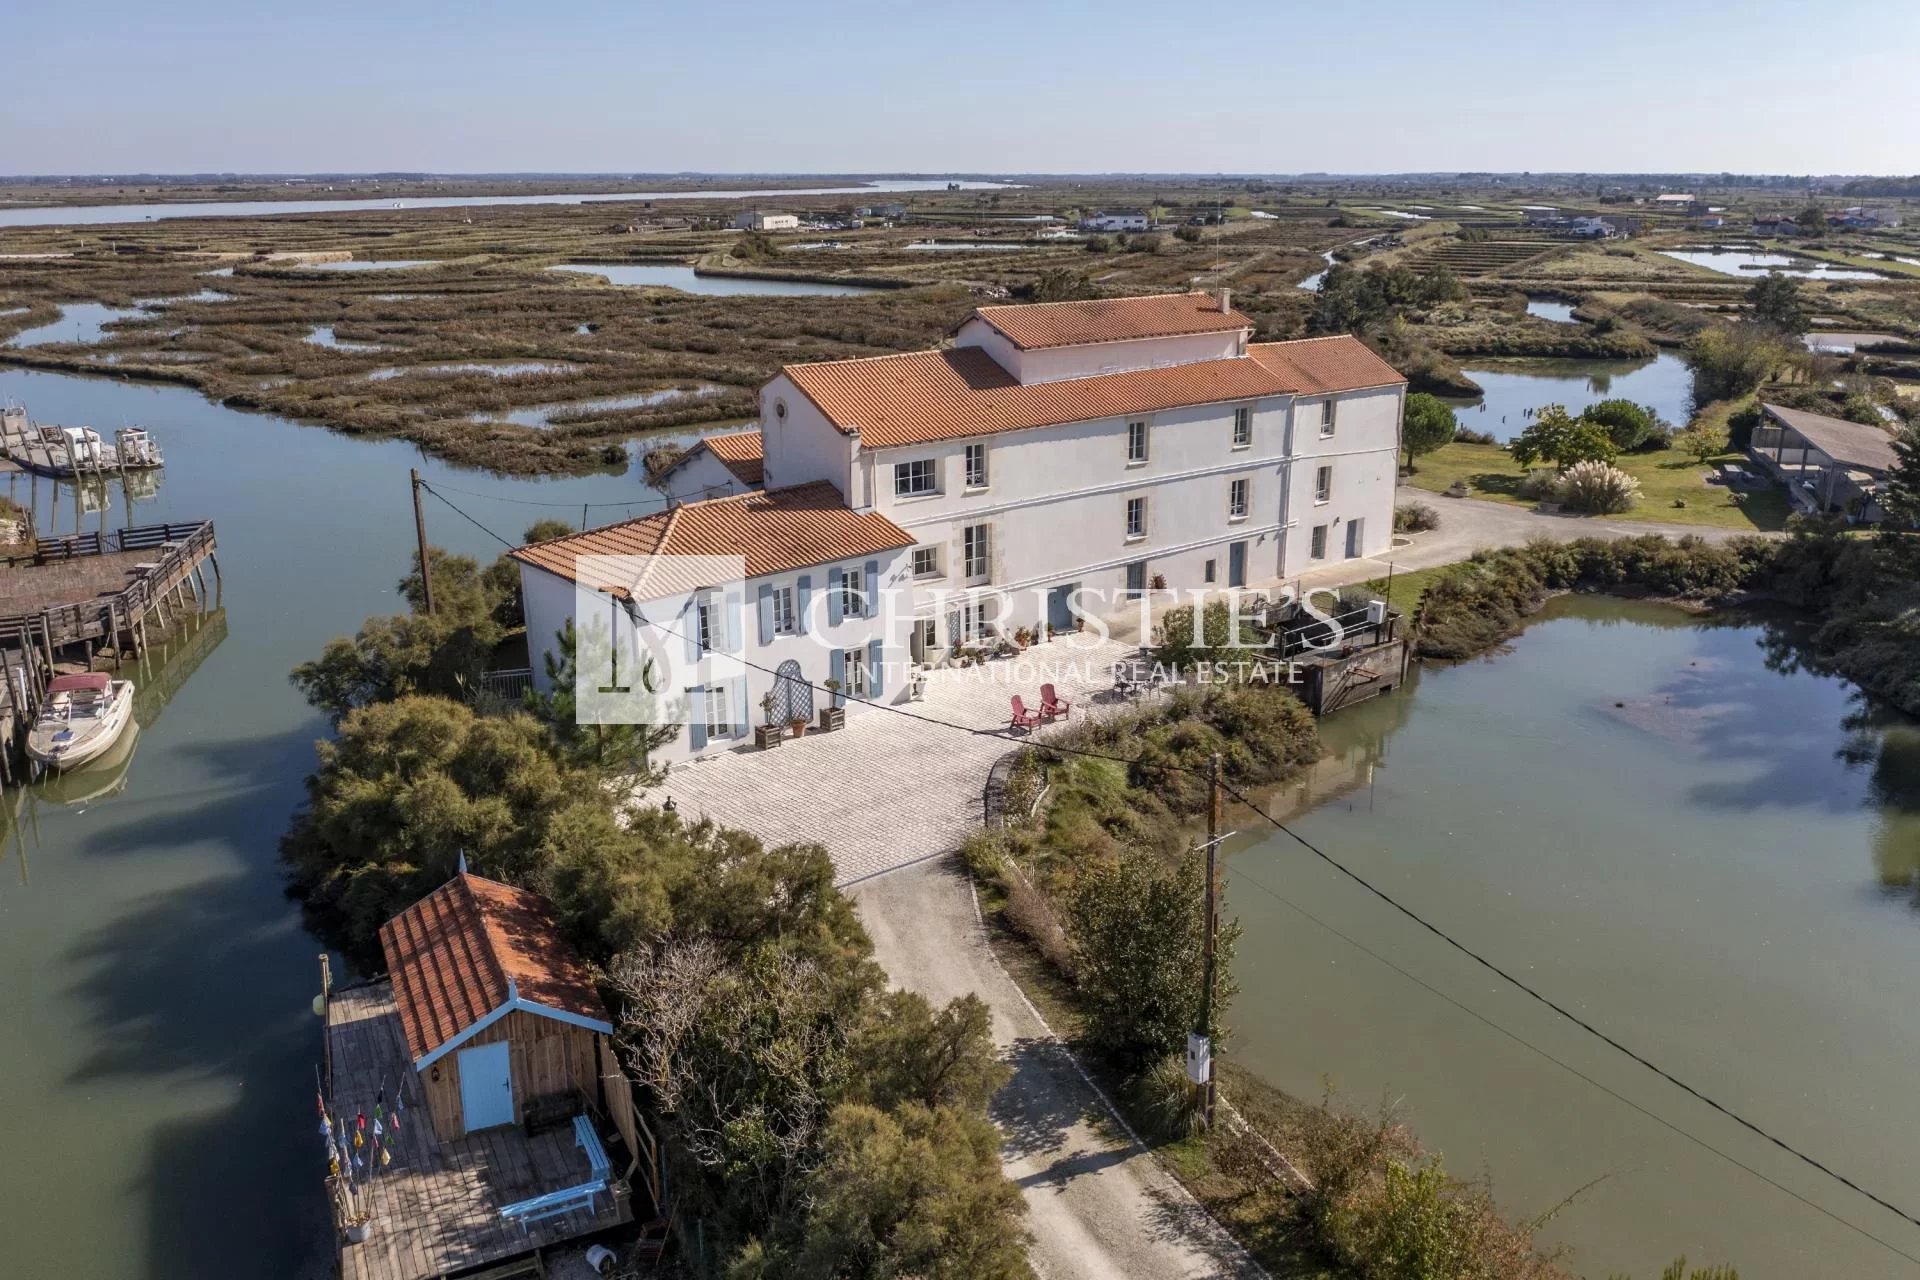 For Sale - fully renovated 15th century tide mill